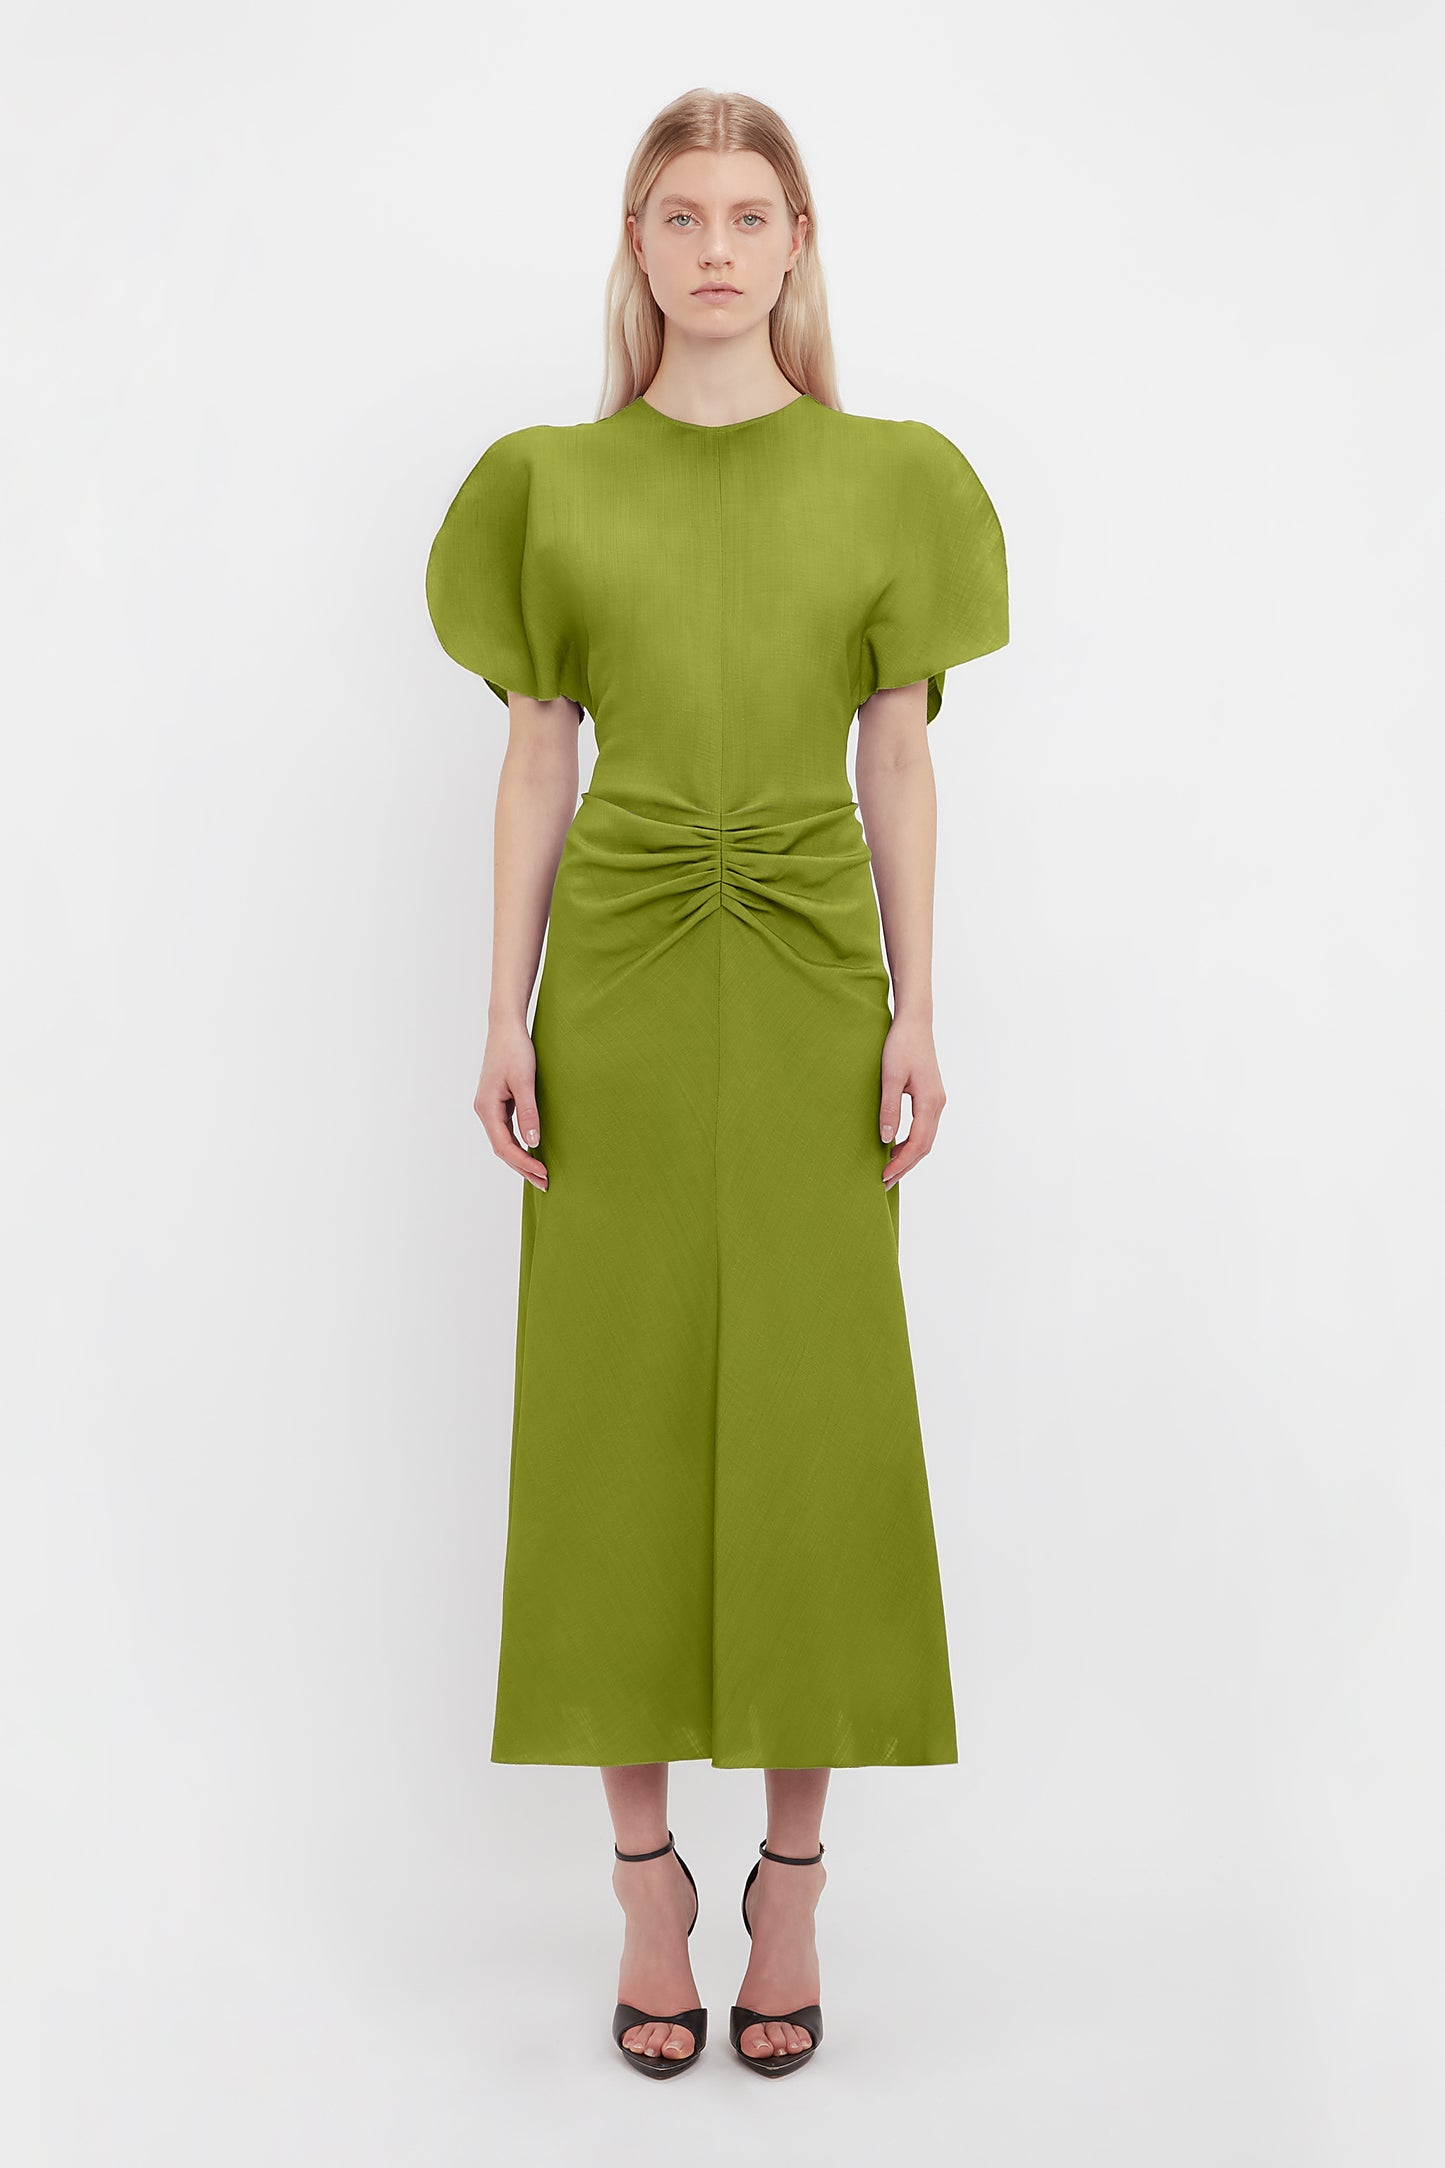 Model wears the green dress worn by Bella Hadid in the Victoria Beckham Paris Fashion Show. With a gathered front, midi length and soft flared skirt. A wedding dress guest piece from luxury designer VB. 